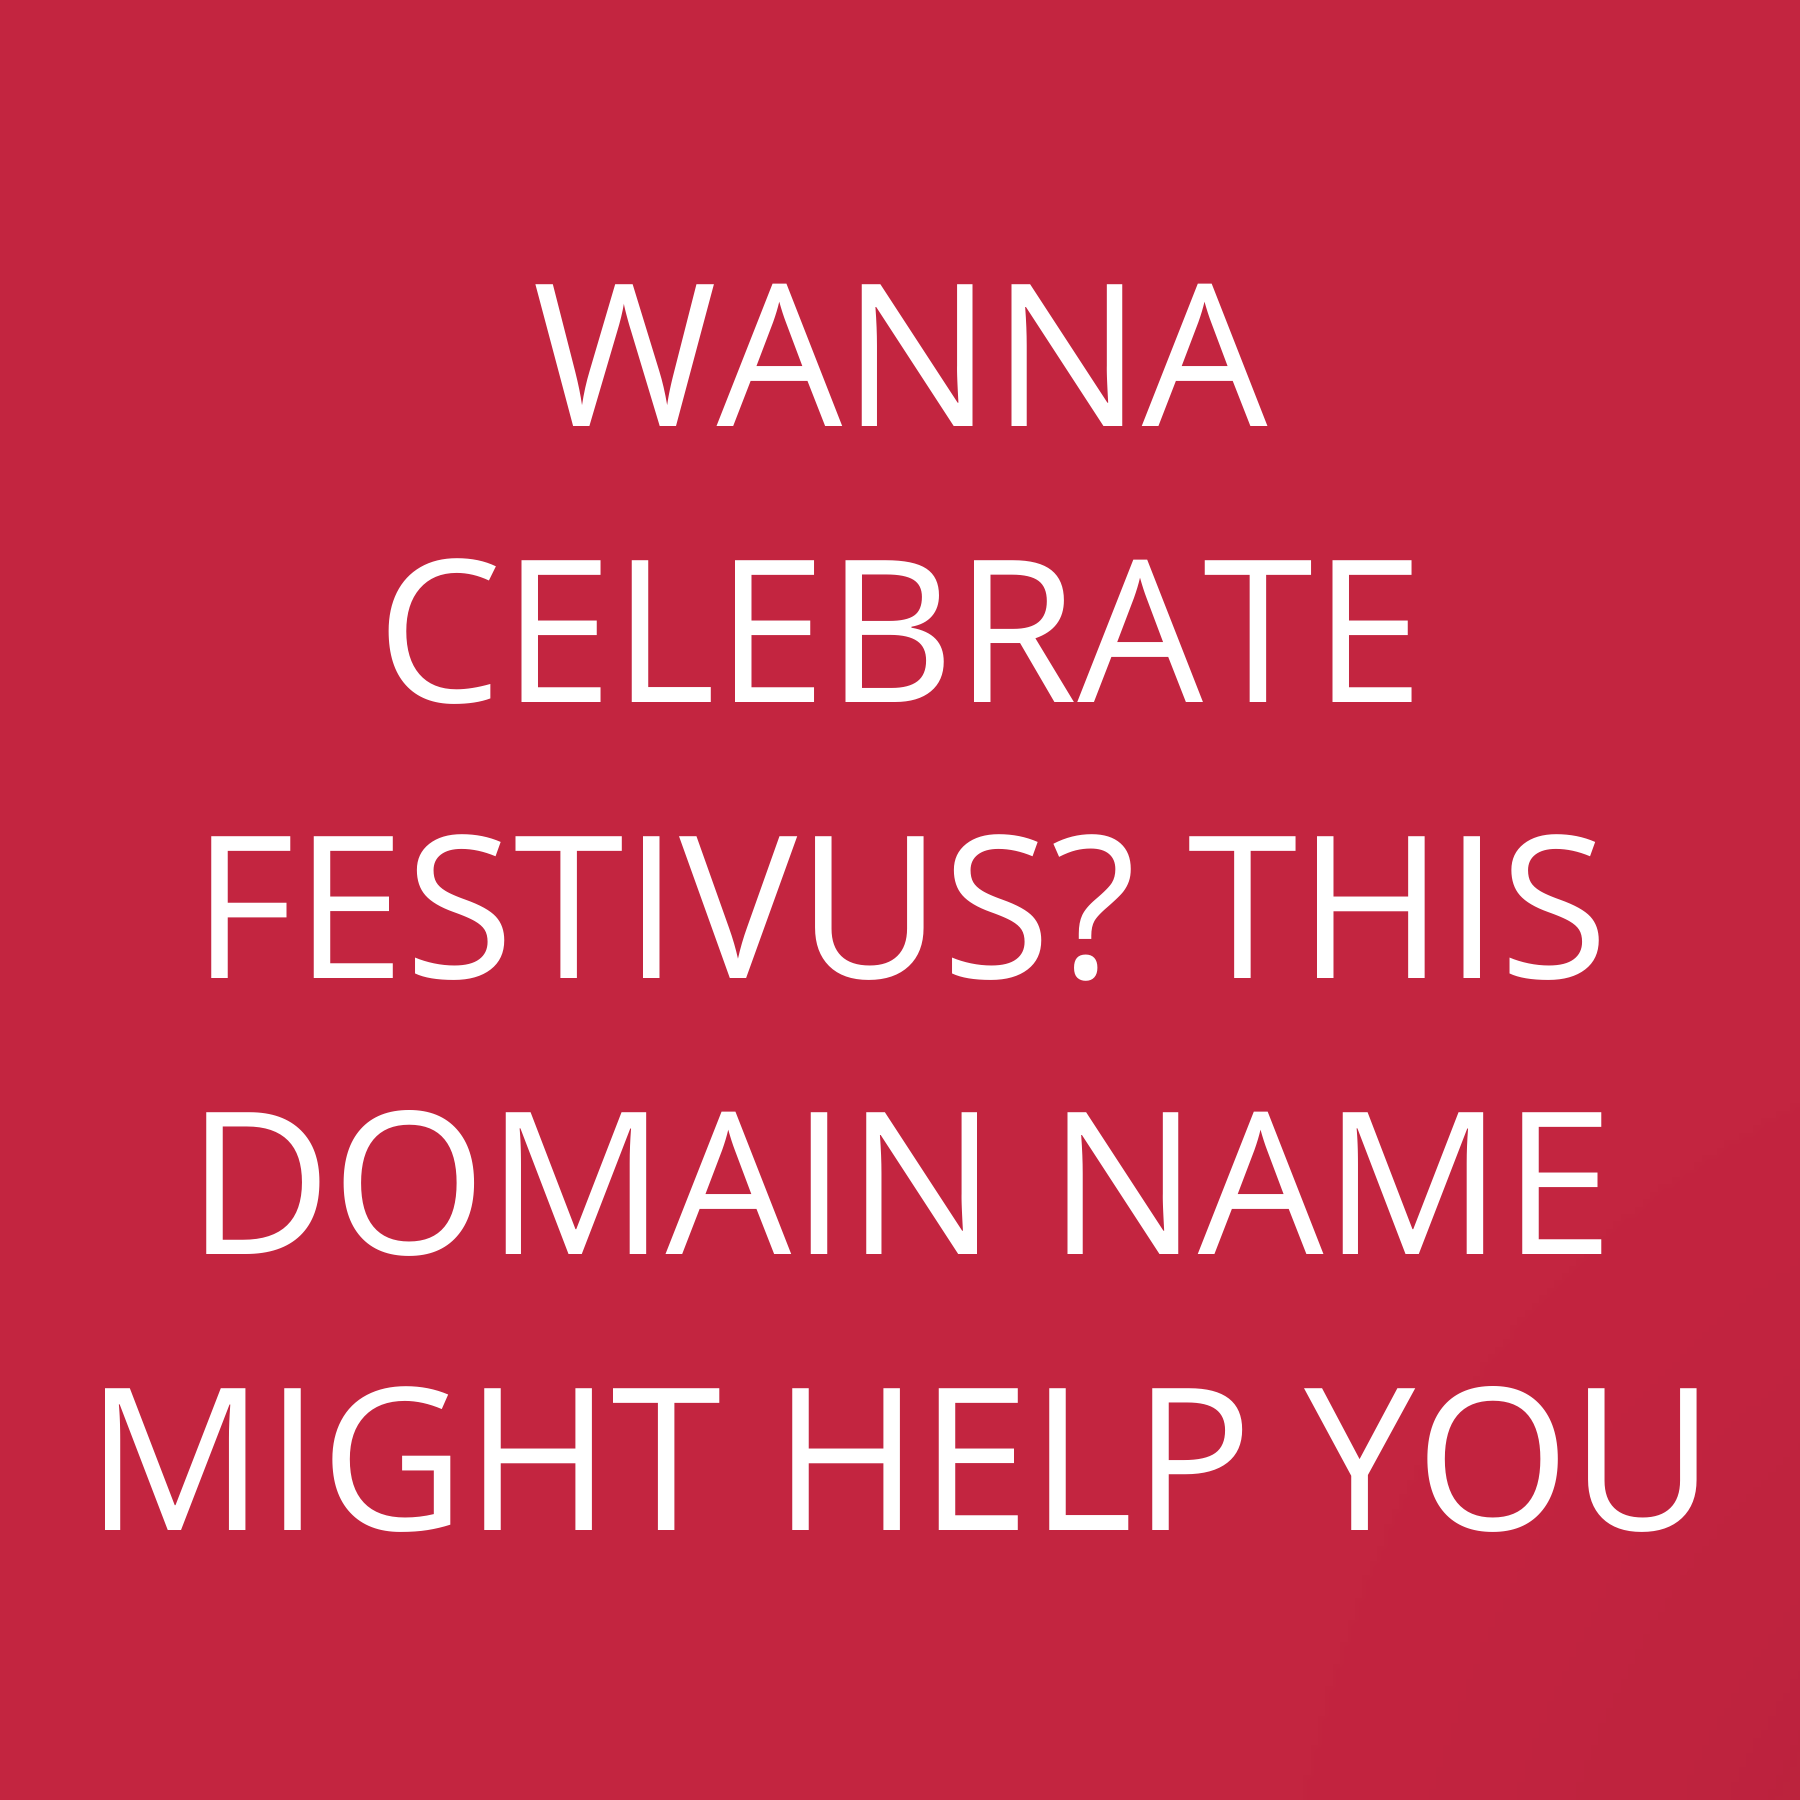 Wanna celebrate Festivus? This domain name might help you